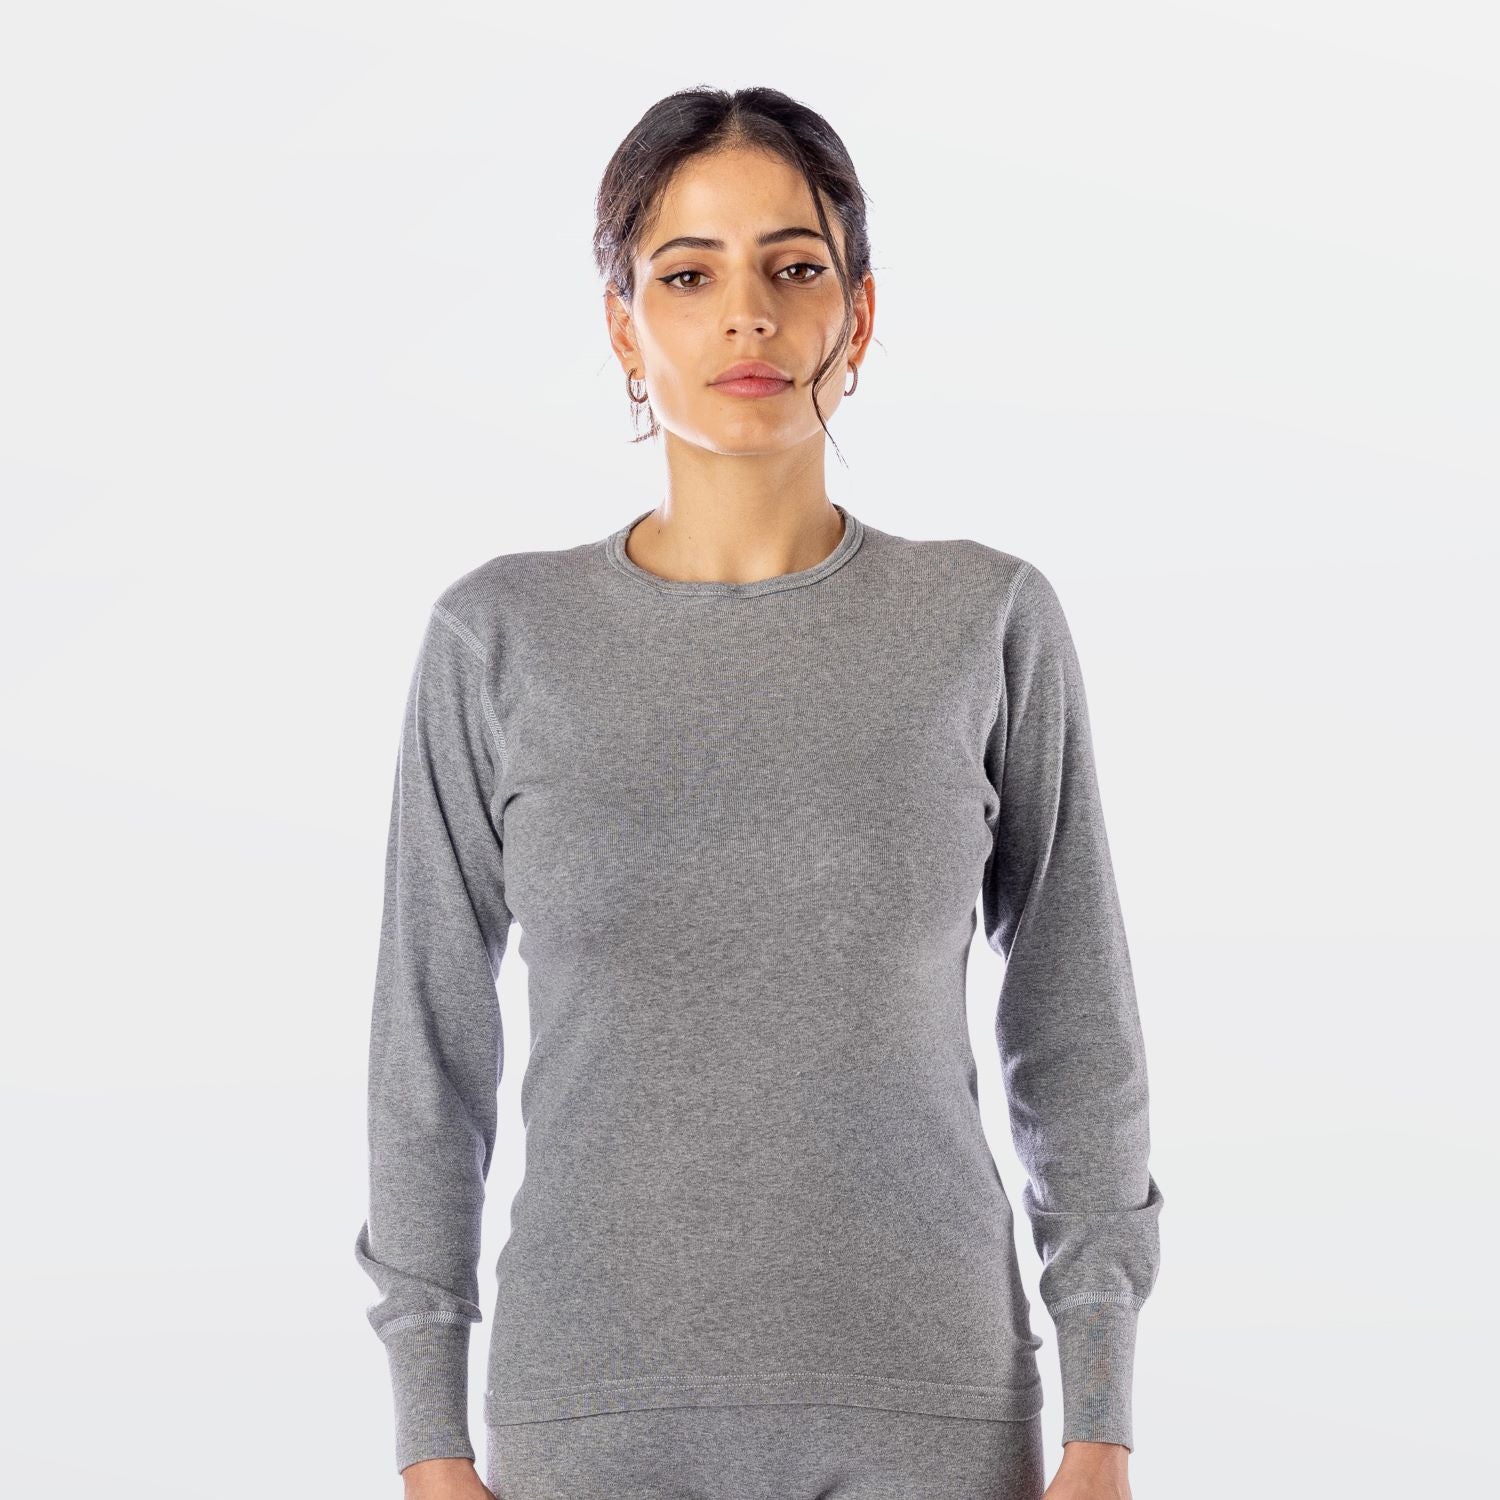 Women's Chill Chasers Cotton Rib Base Layer Top